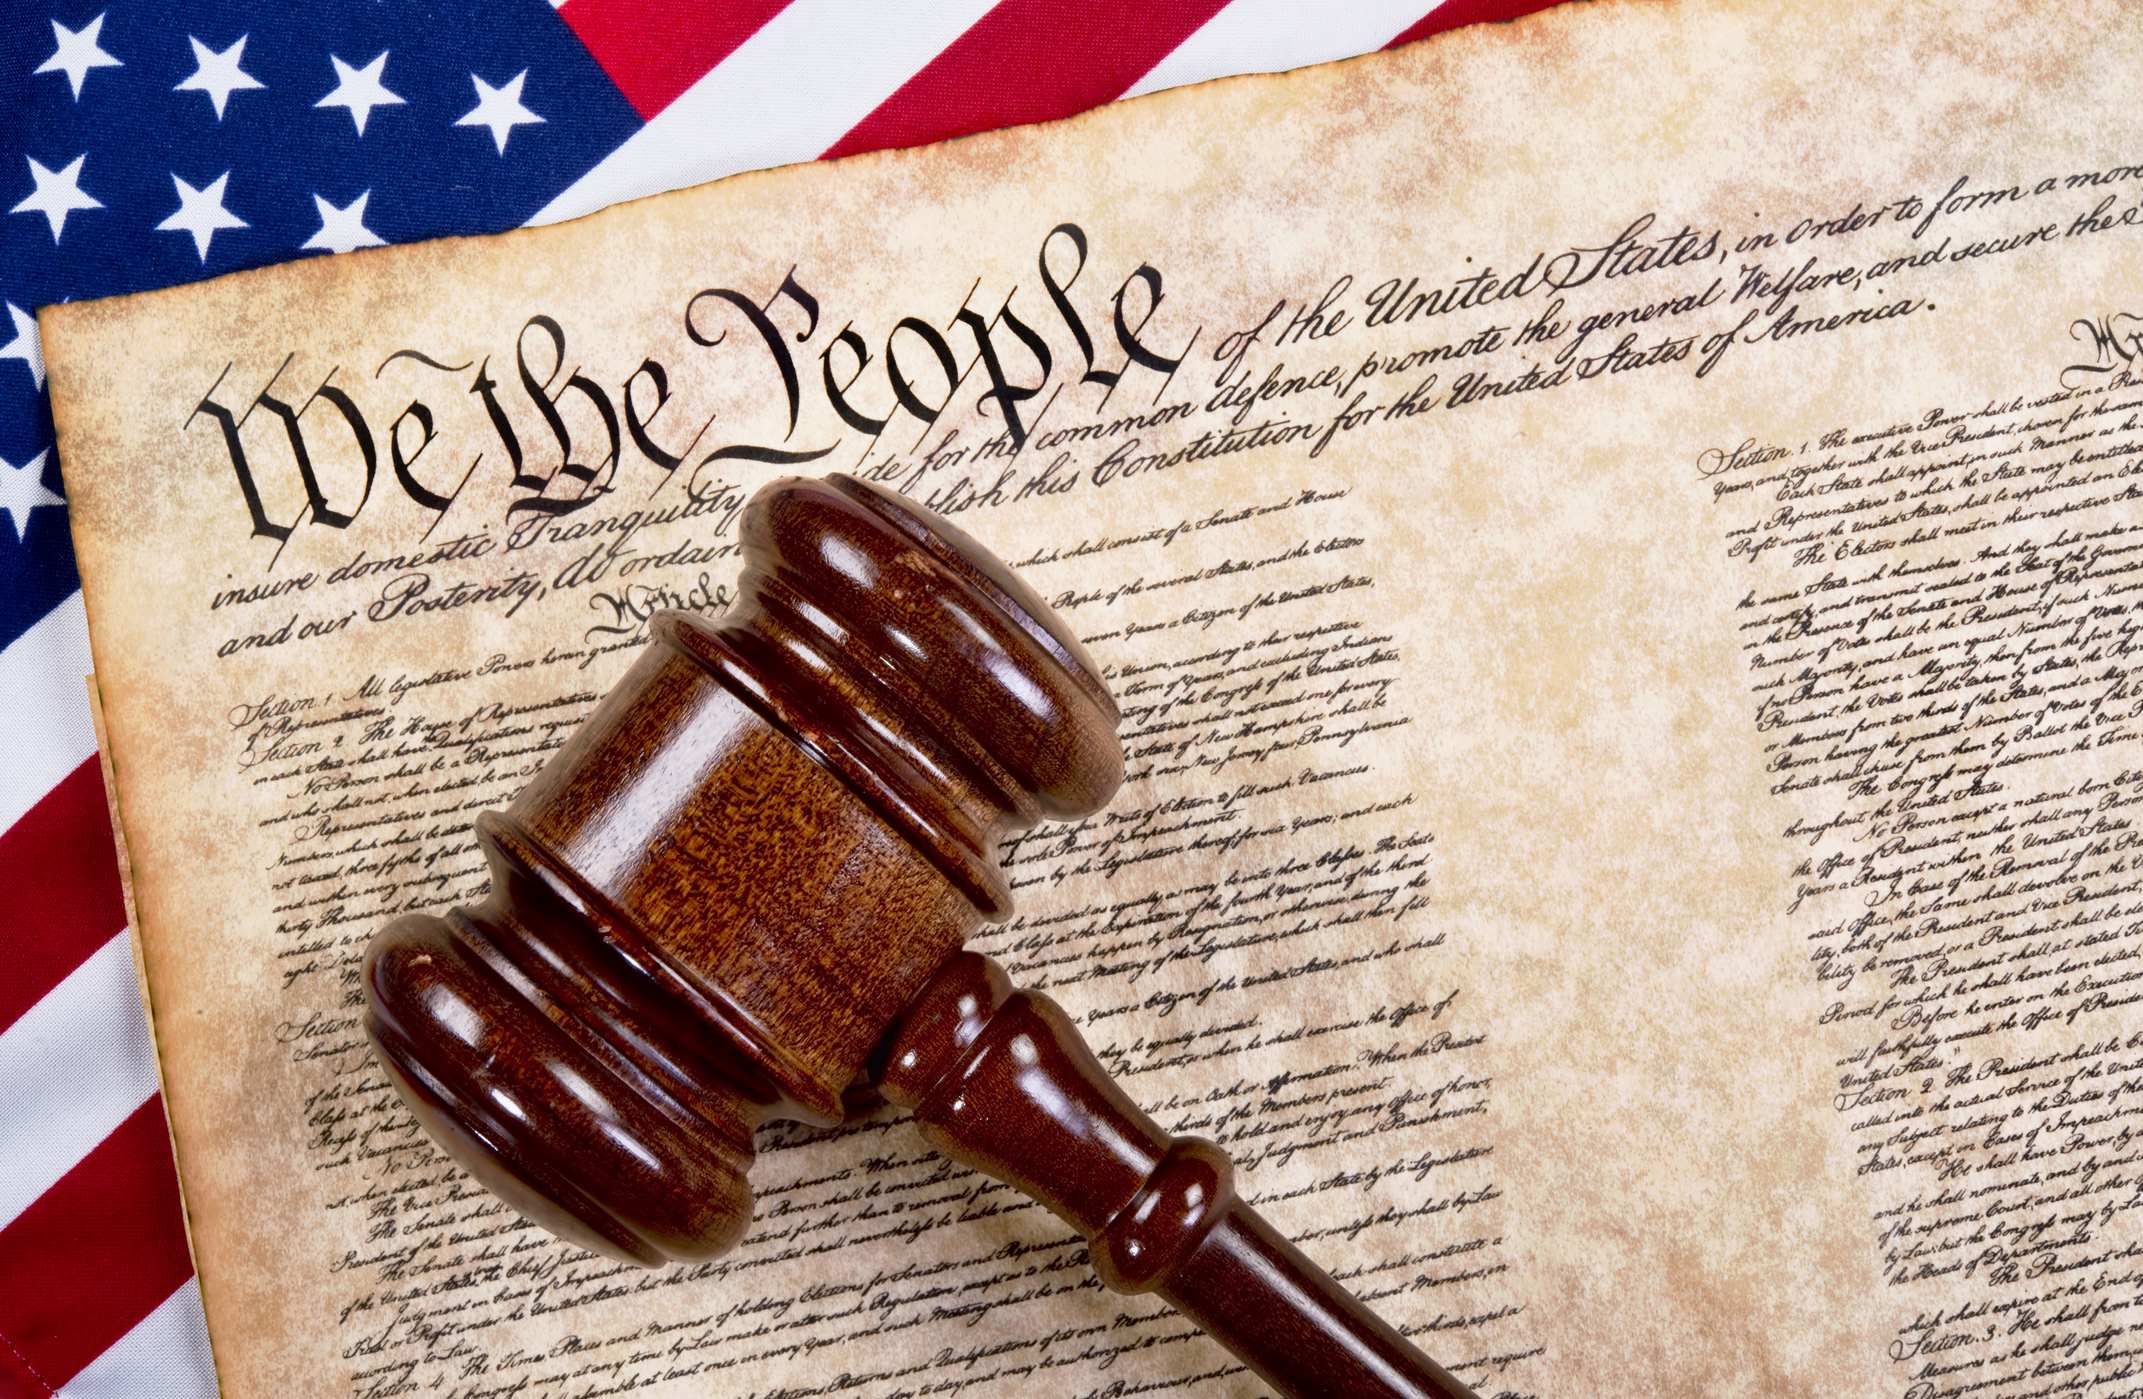 Defend the Constitution when officials undermine it.